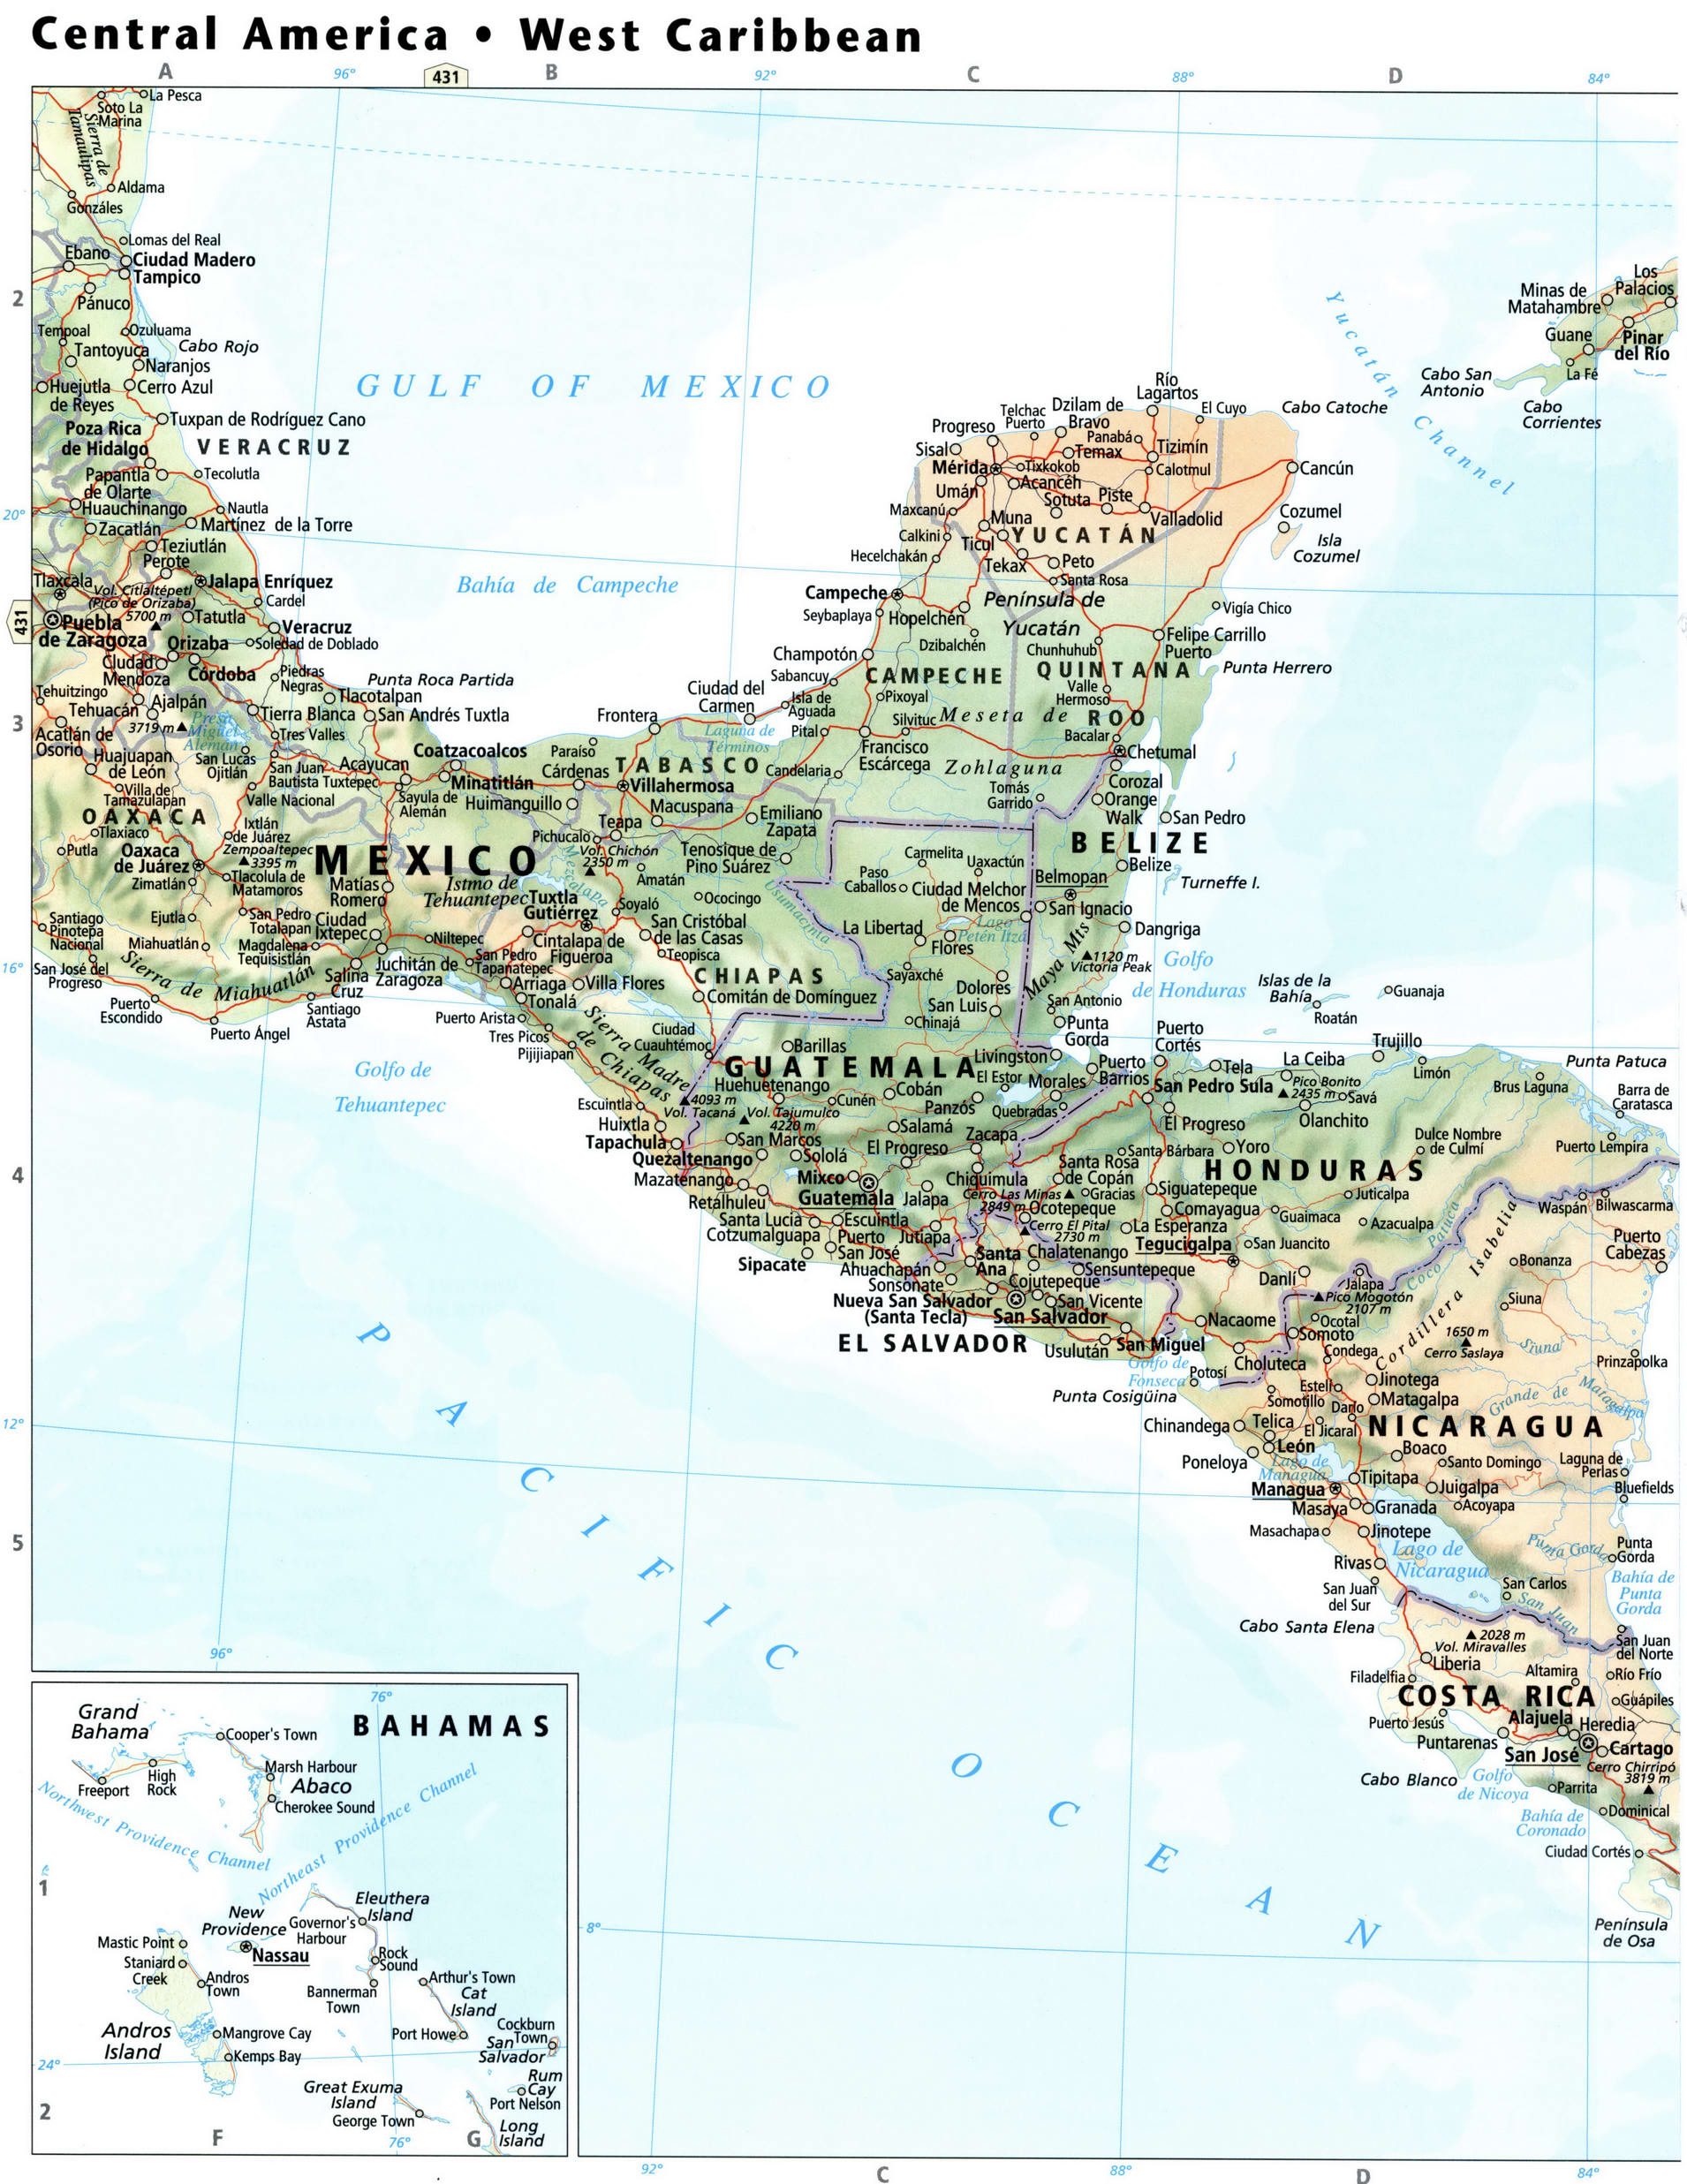 Central America and West Caribbean map